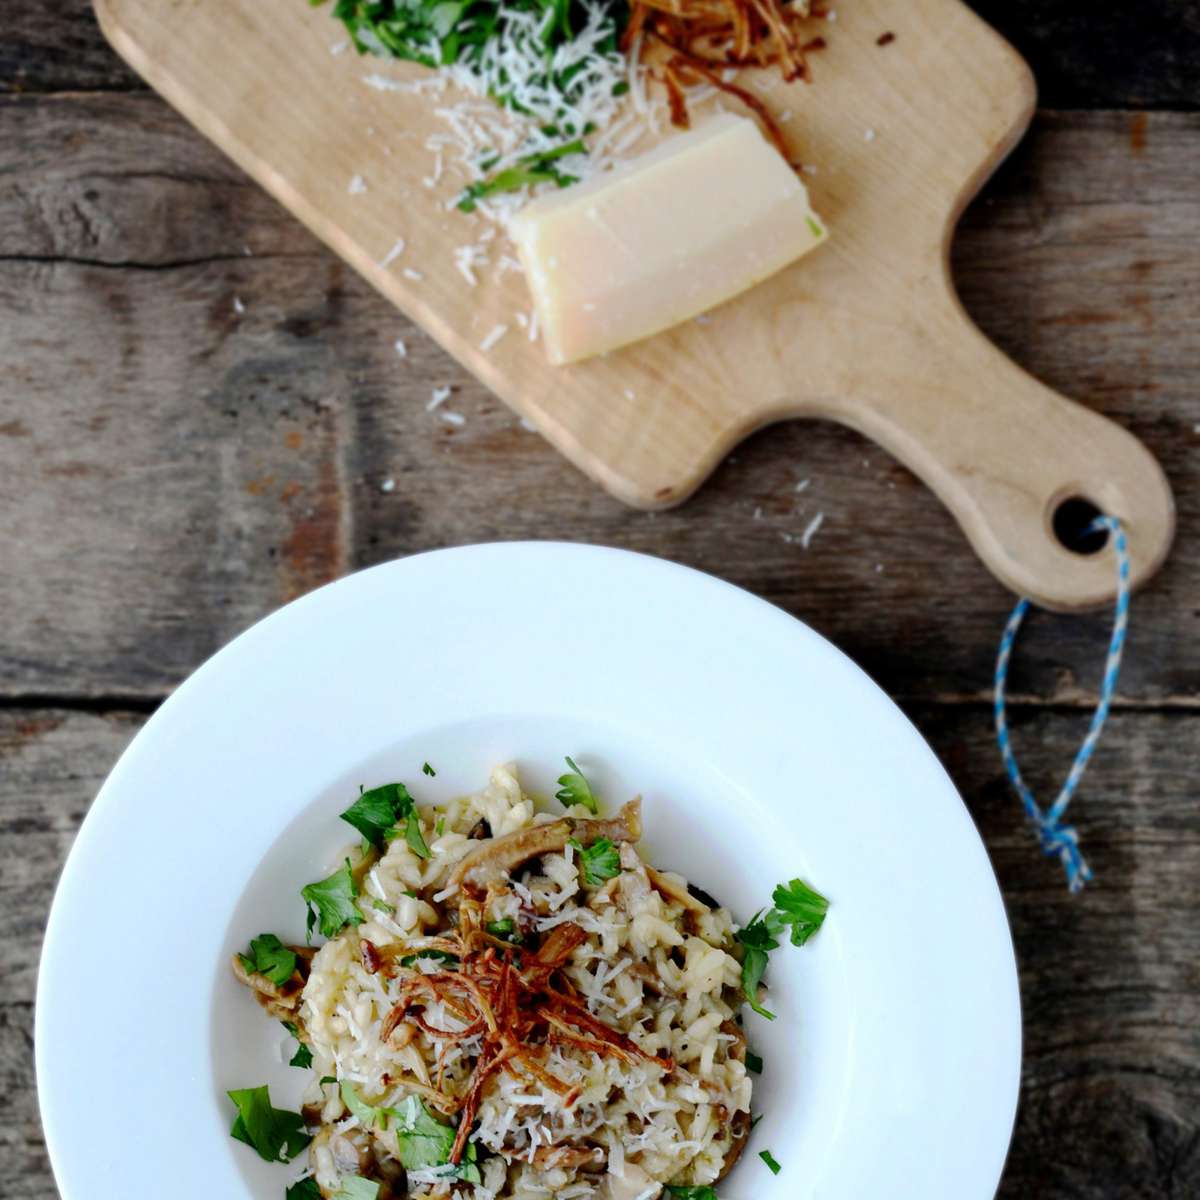 image?url=https%3A%2F%2Fstatic.onecms.io%2Fwp content%2Fuploads%2Fsites%2F9%2F2013%2F12%2F06%2F2012 r xl dried porcini mushroom risotto with goat cheese 2000